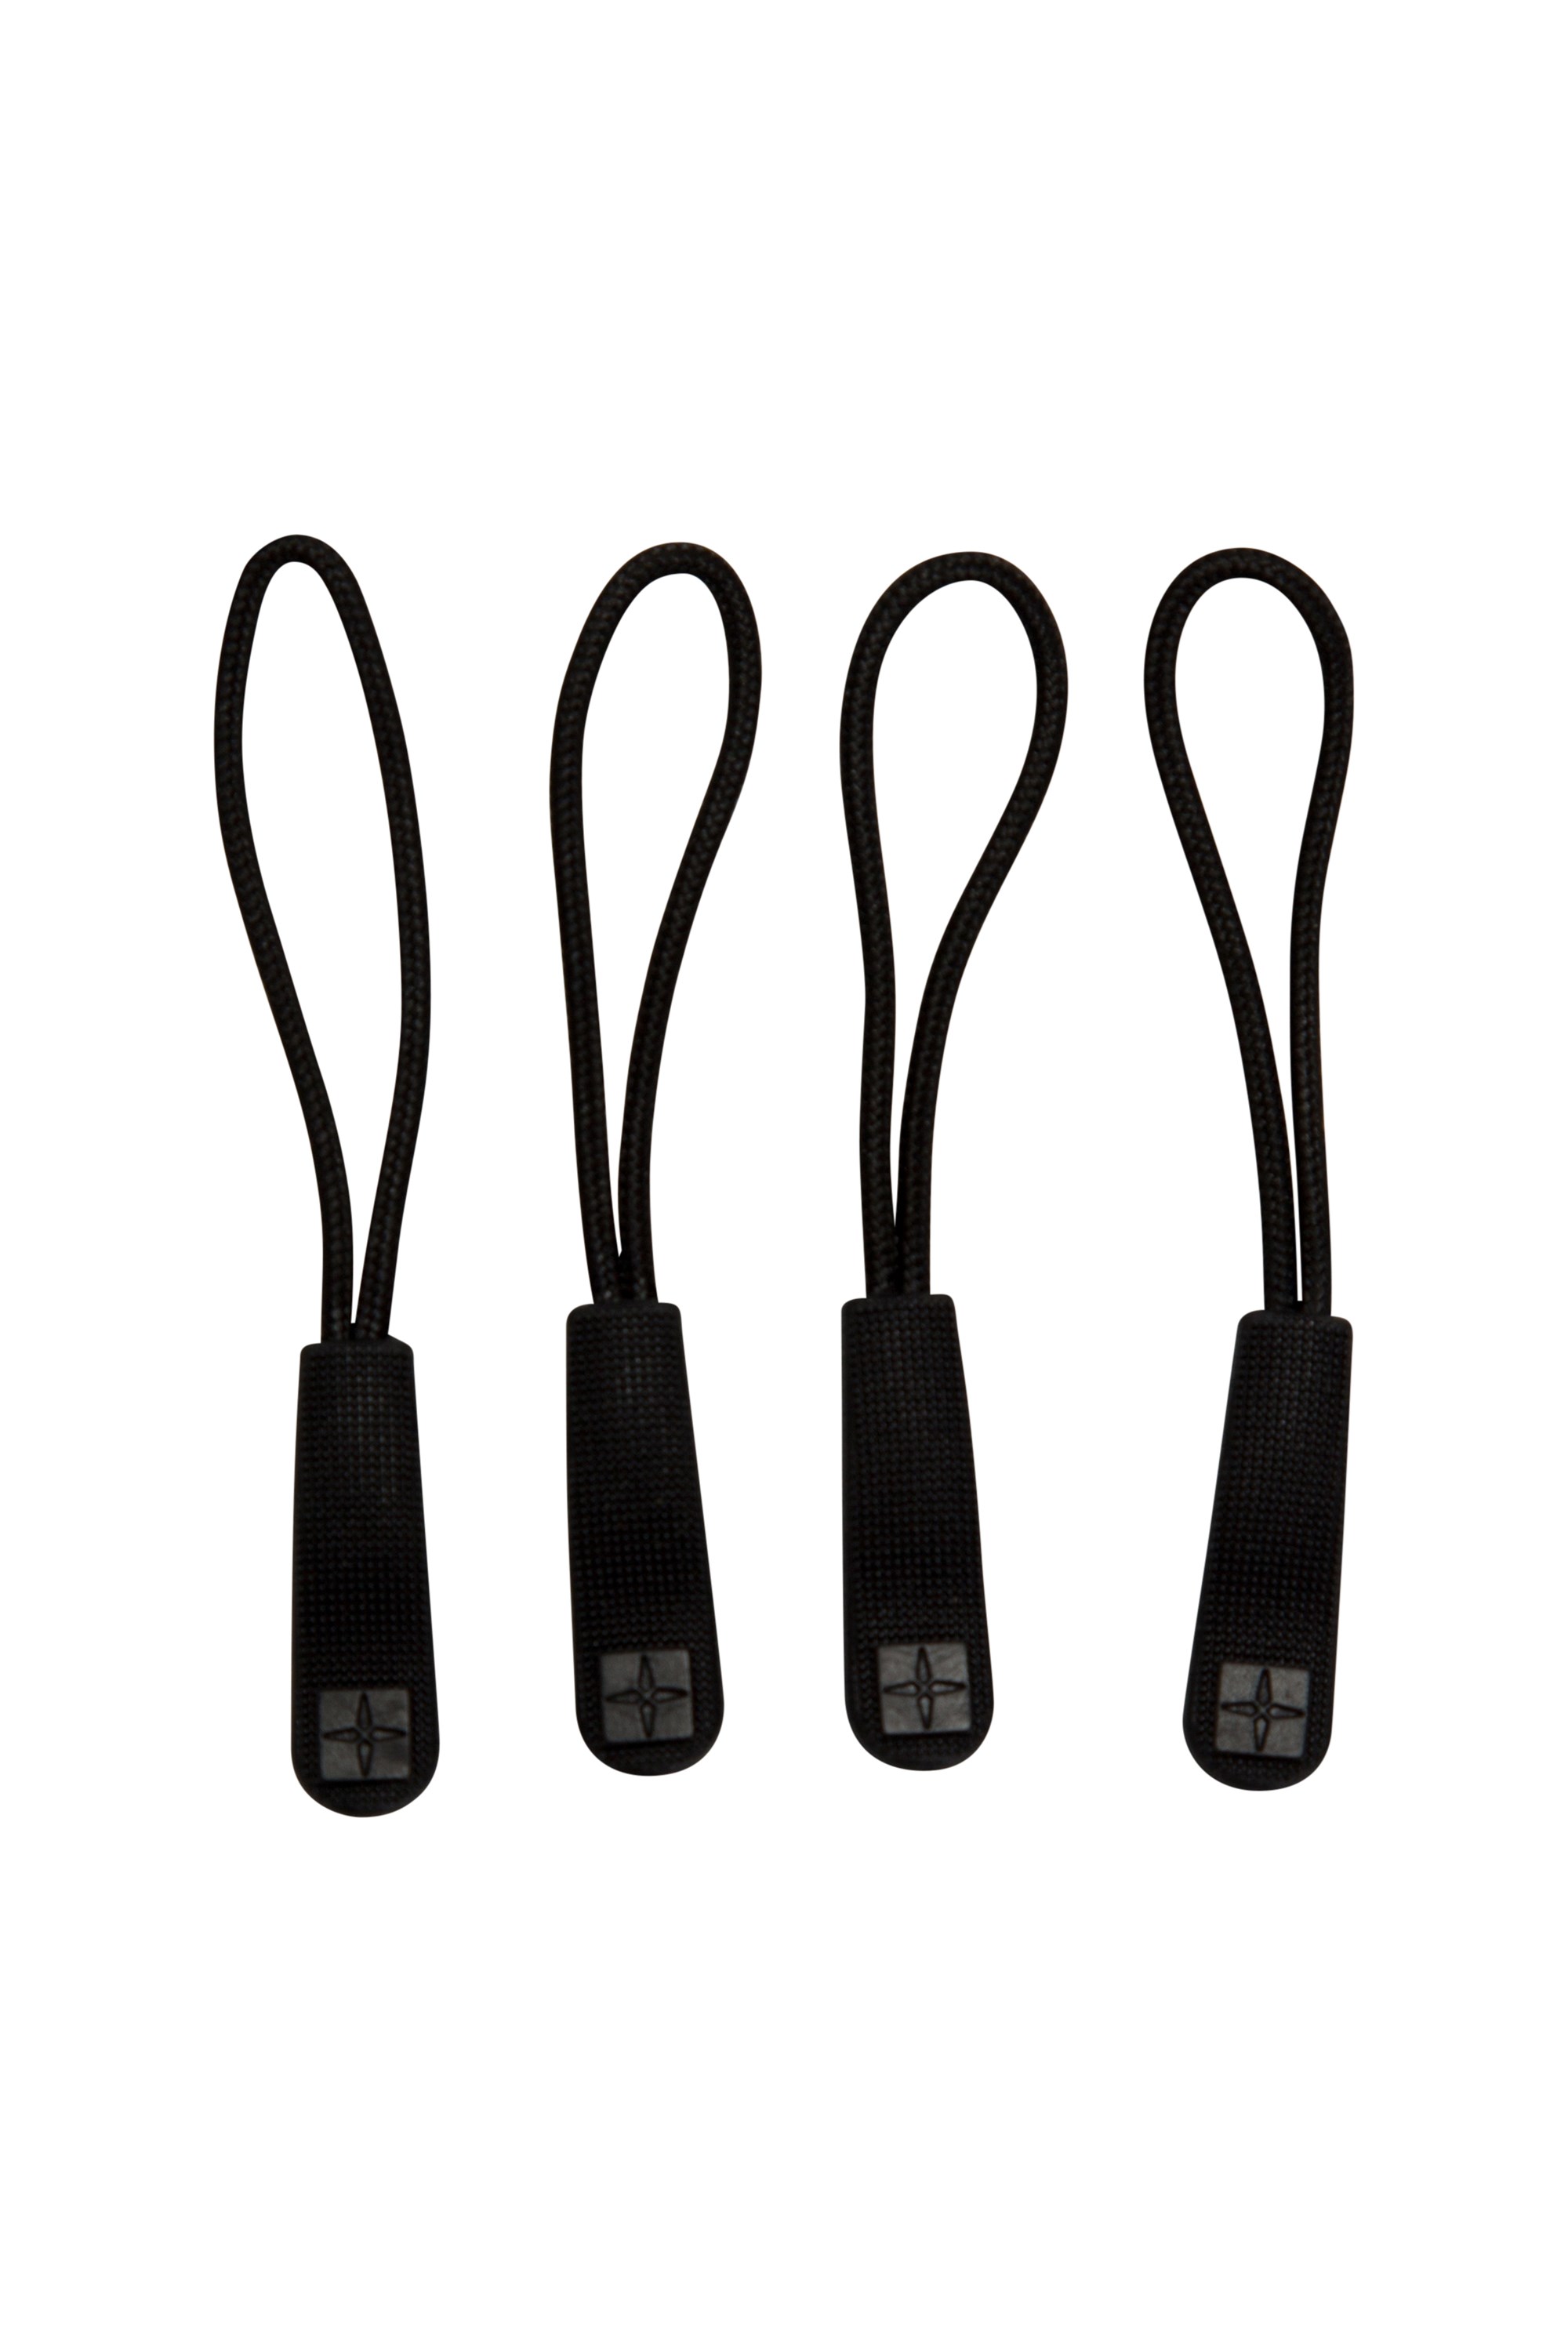 Mountain Warehouse Spare Zip Pullers 4 Pack Black